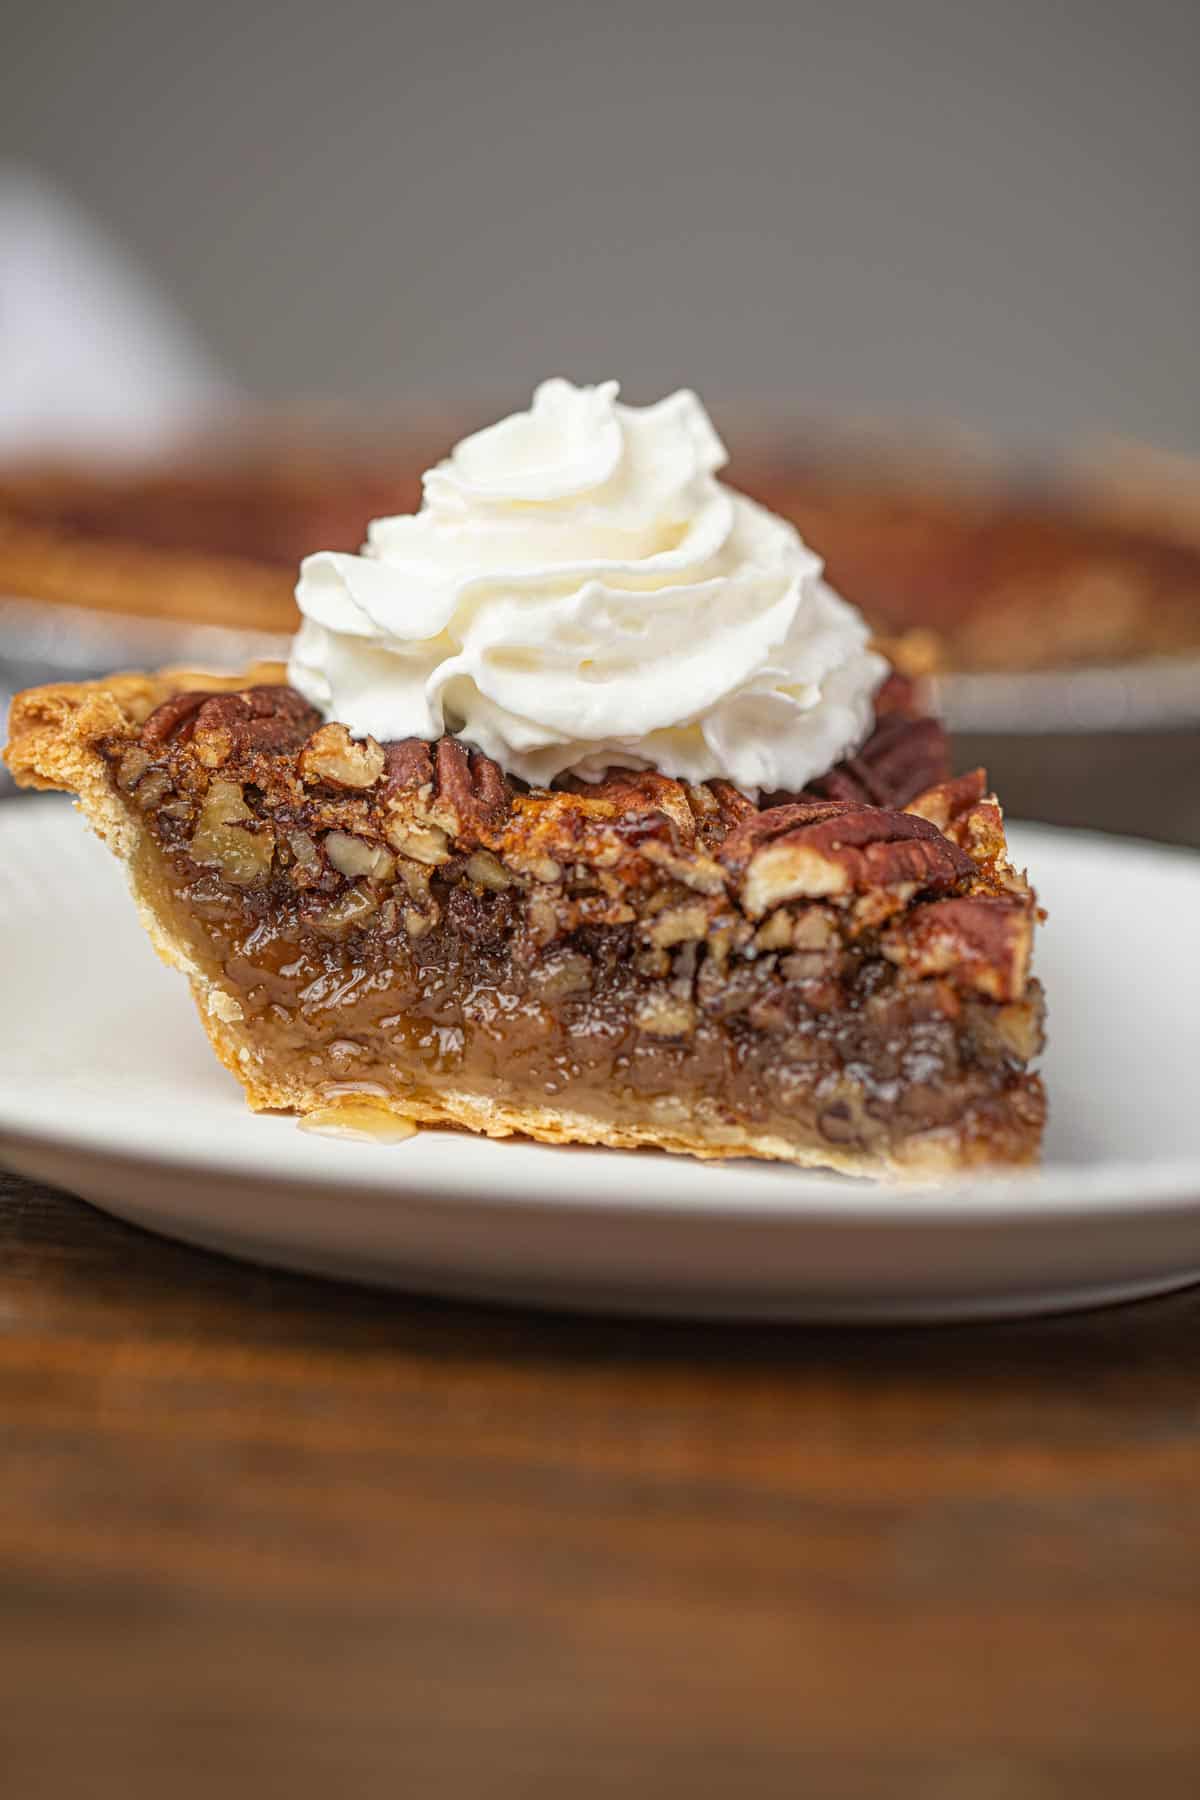 Pecan Pie with Whipped Cream on Plate